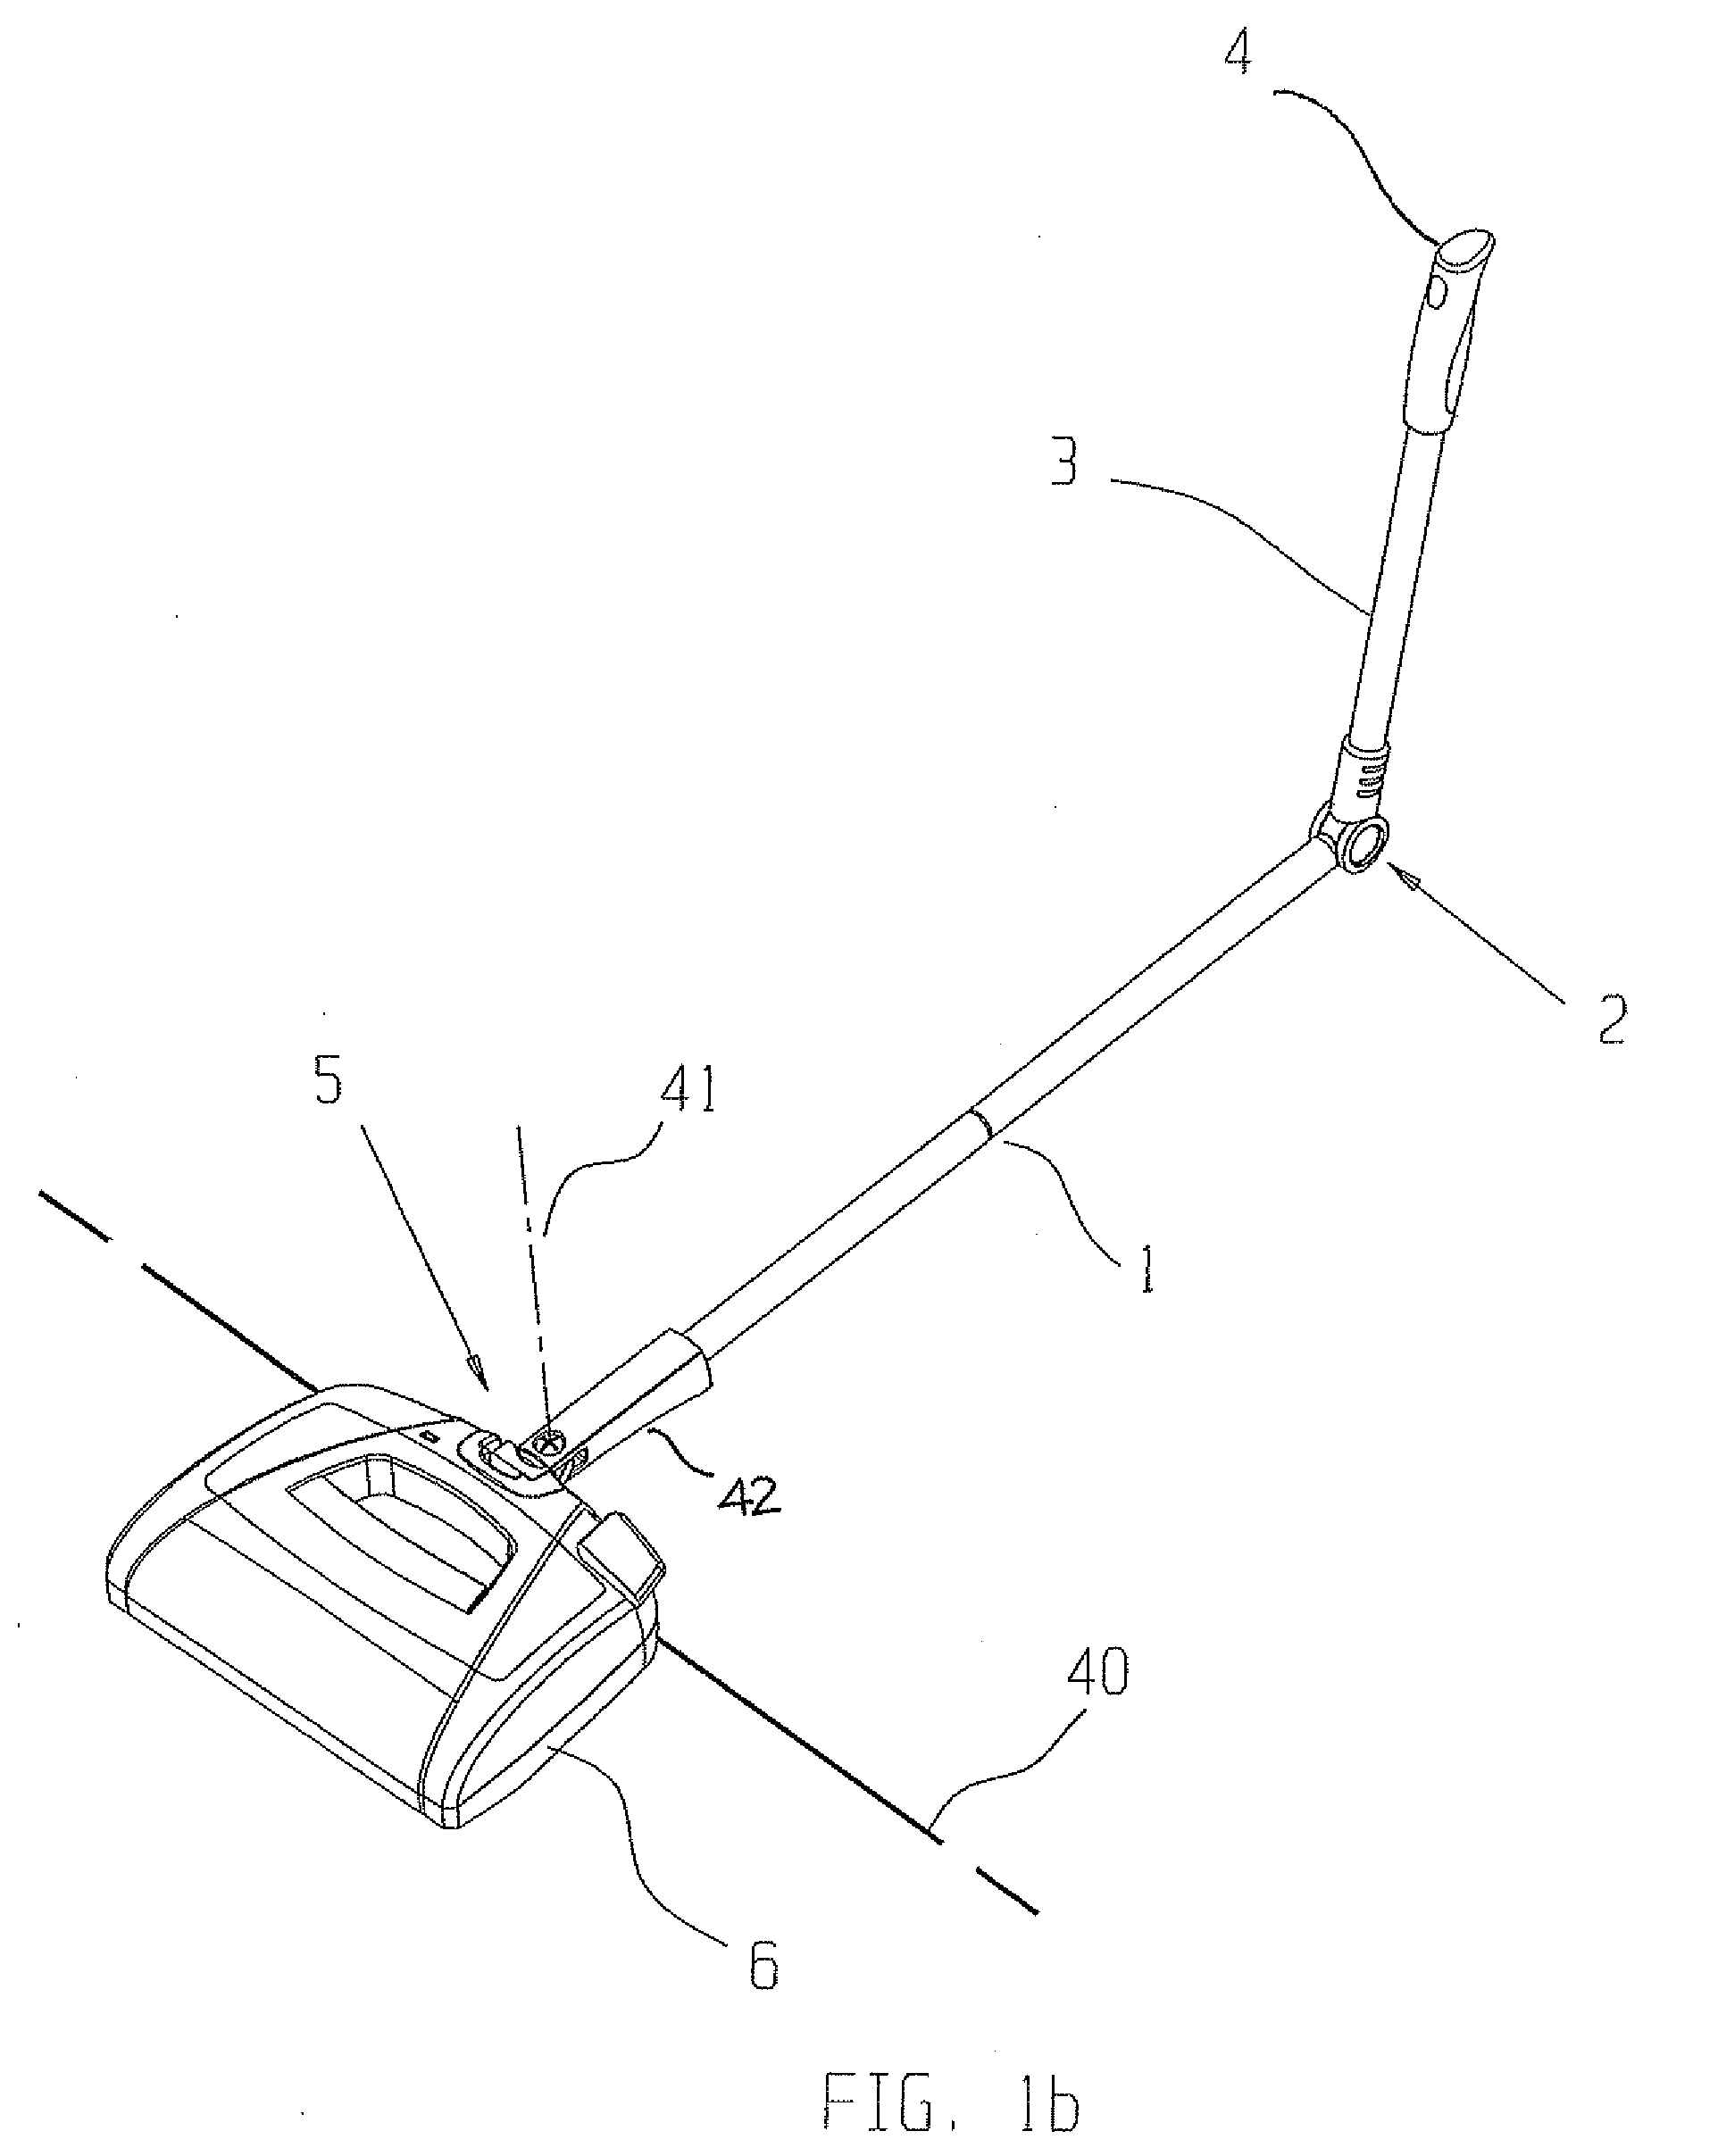 Floor cleaning apparatus with elongate handle and handle extension